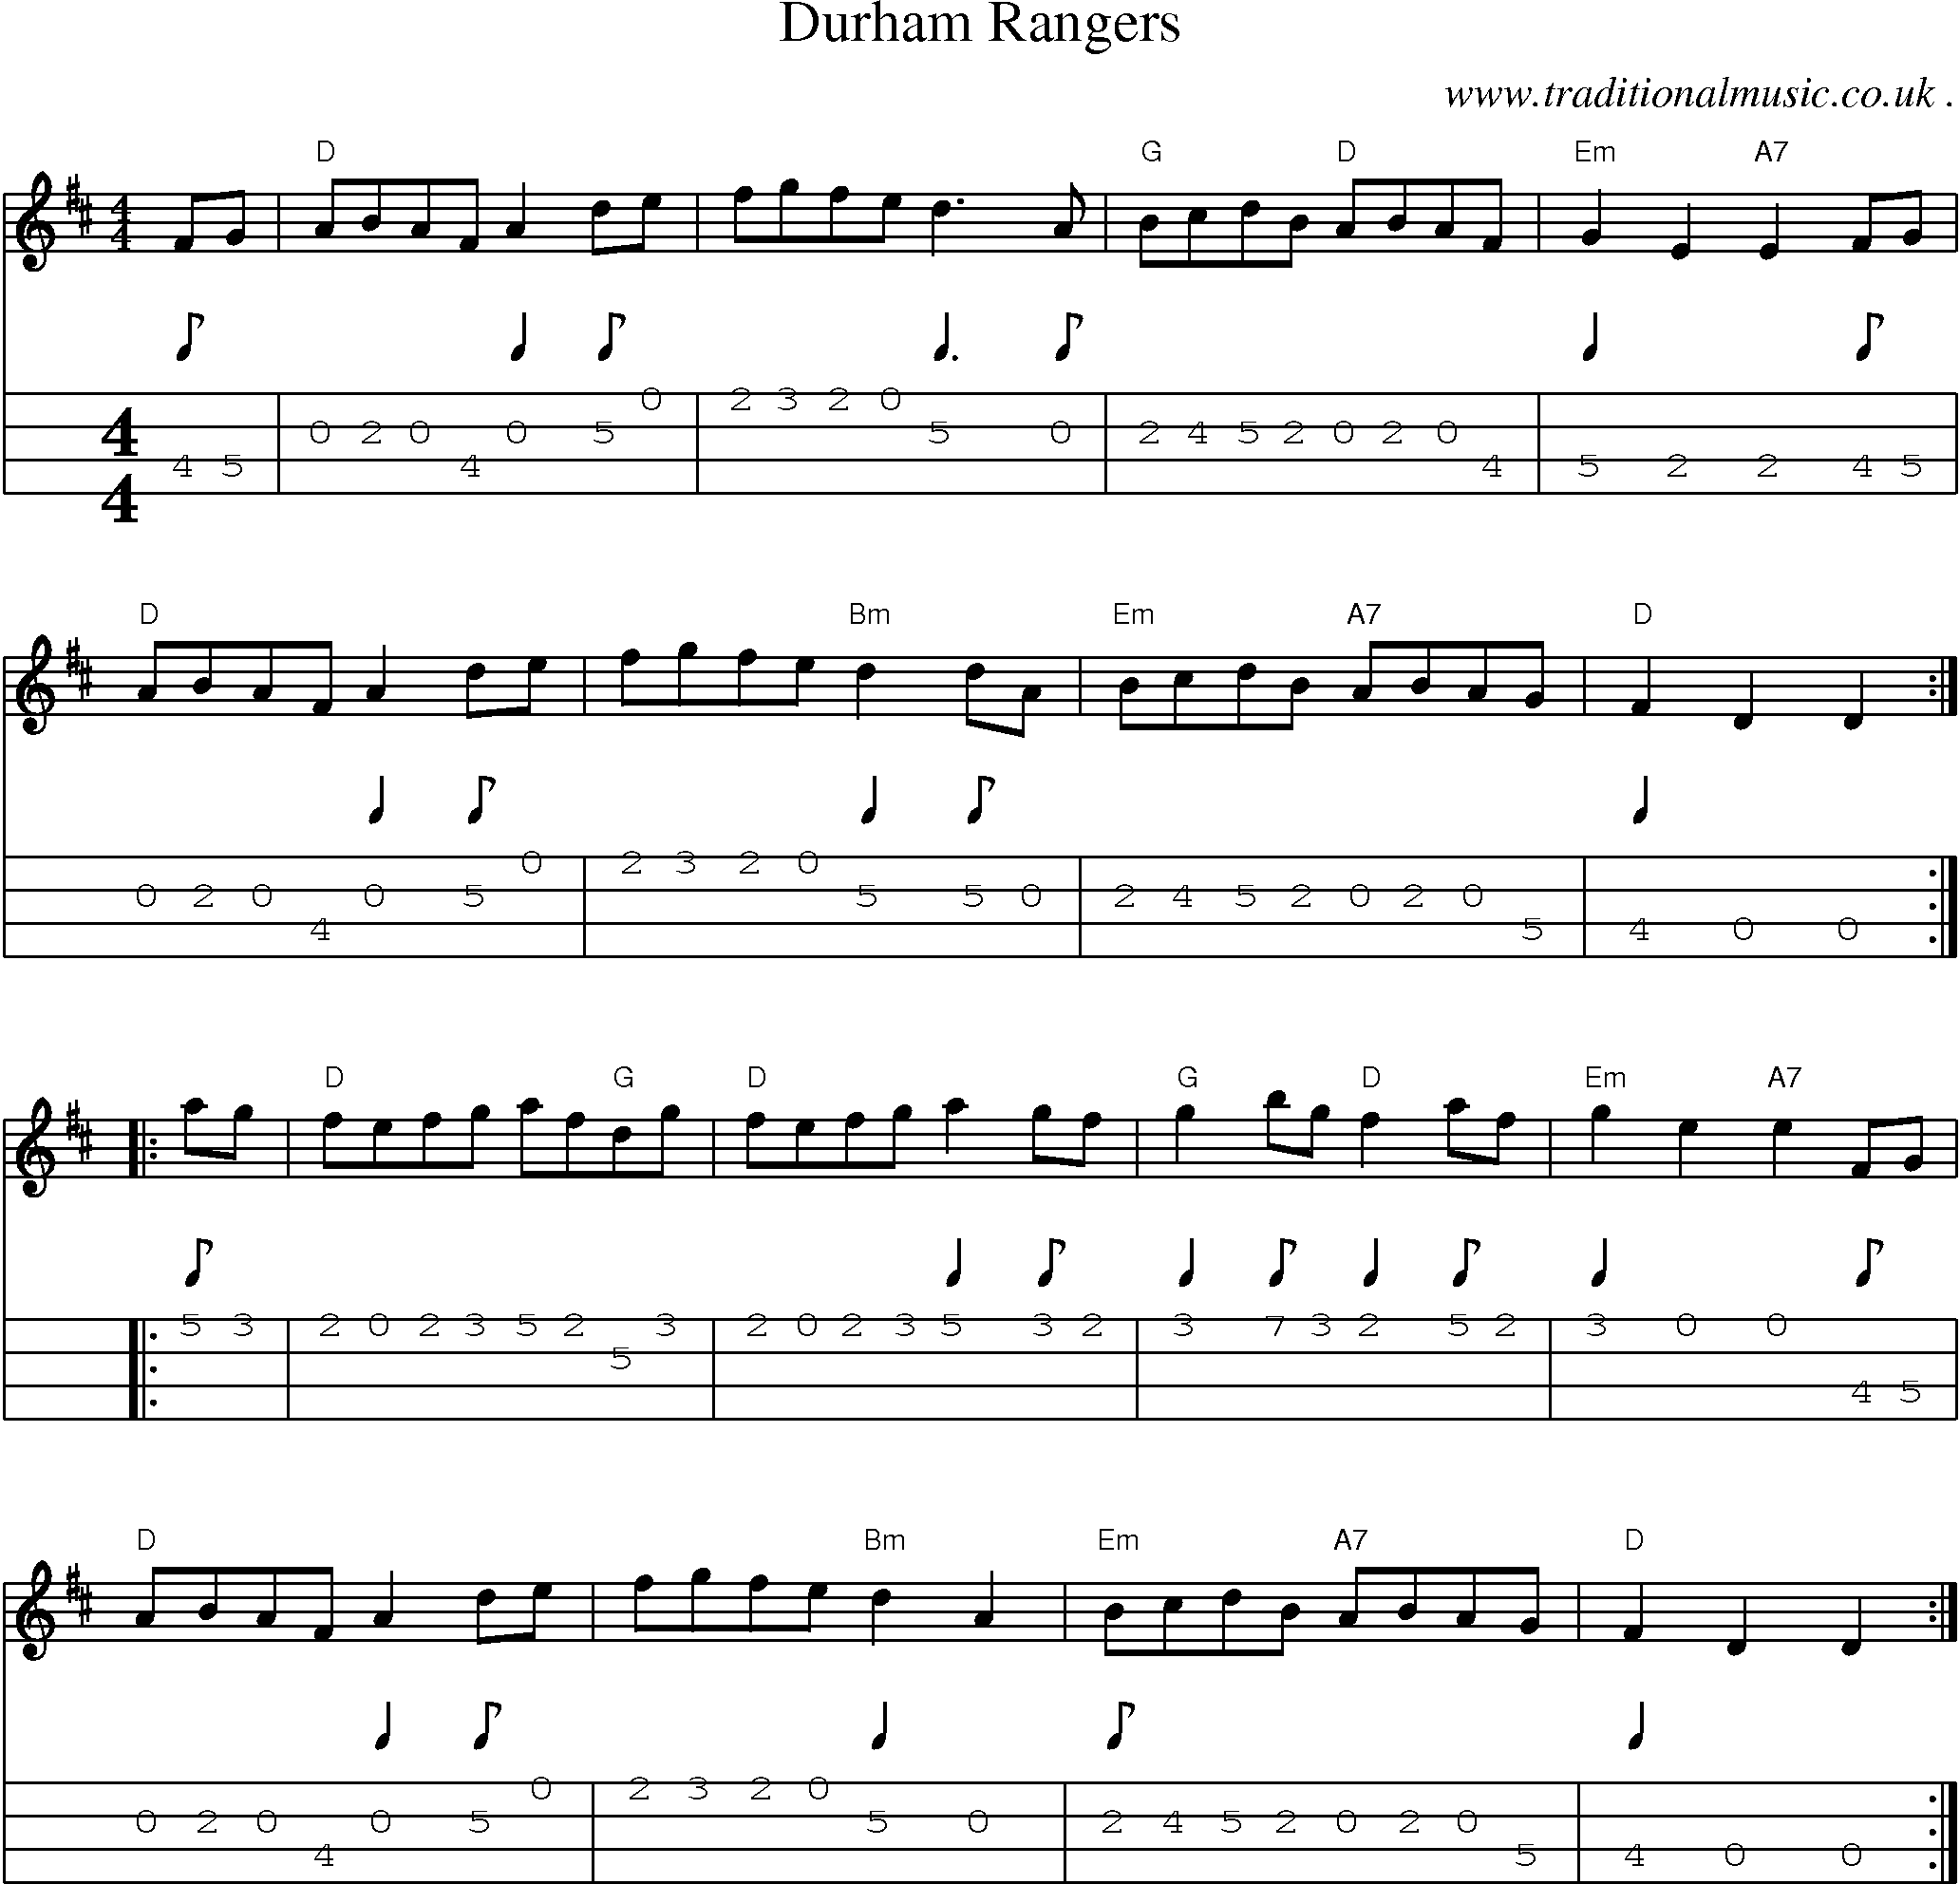 Music Score and Guitar Tabs for Durham Rangers